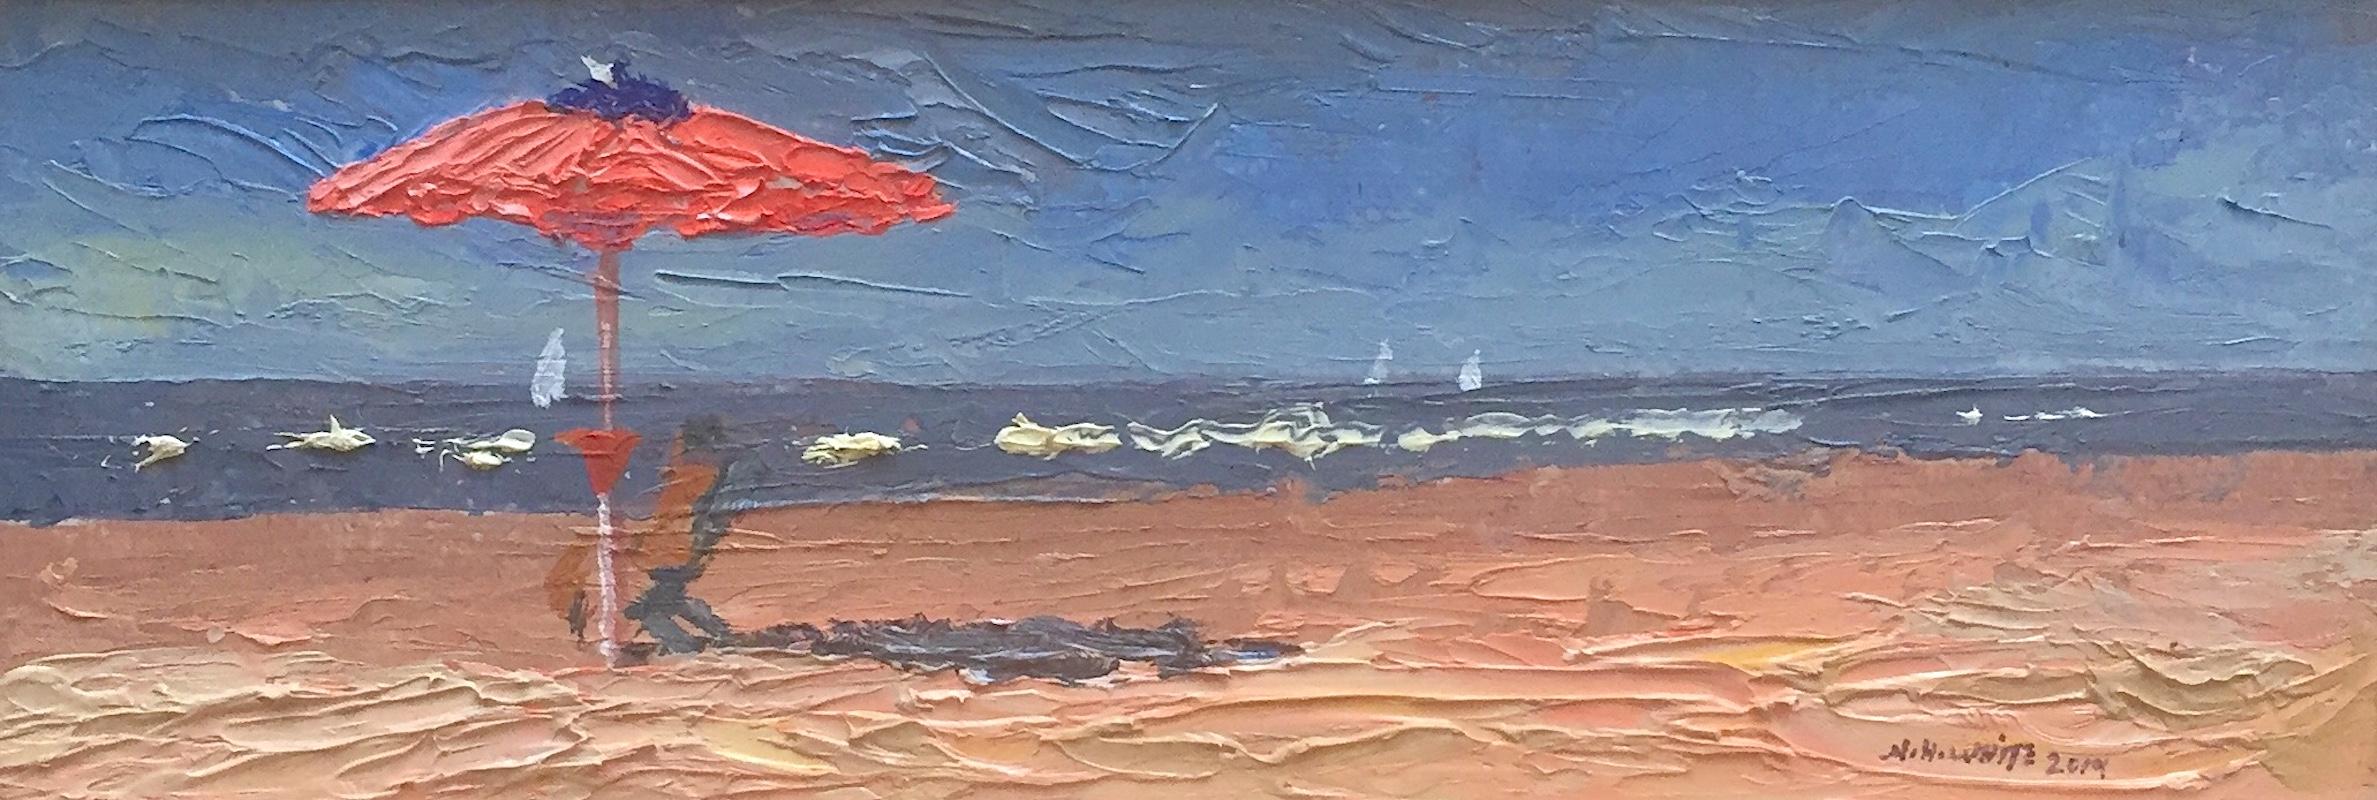 Bagno La Salute 9.29.2019 - Painting by Nelson H. White